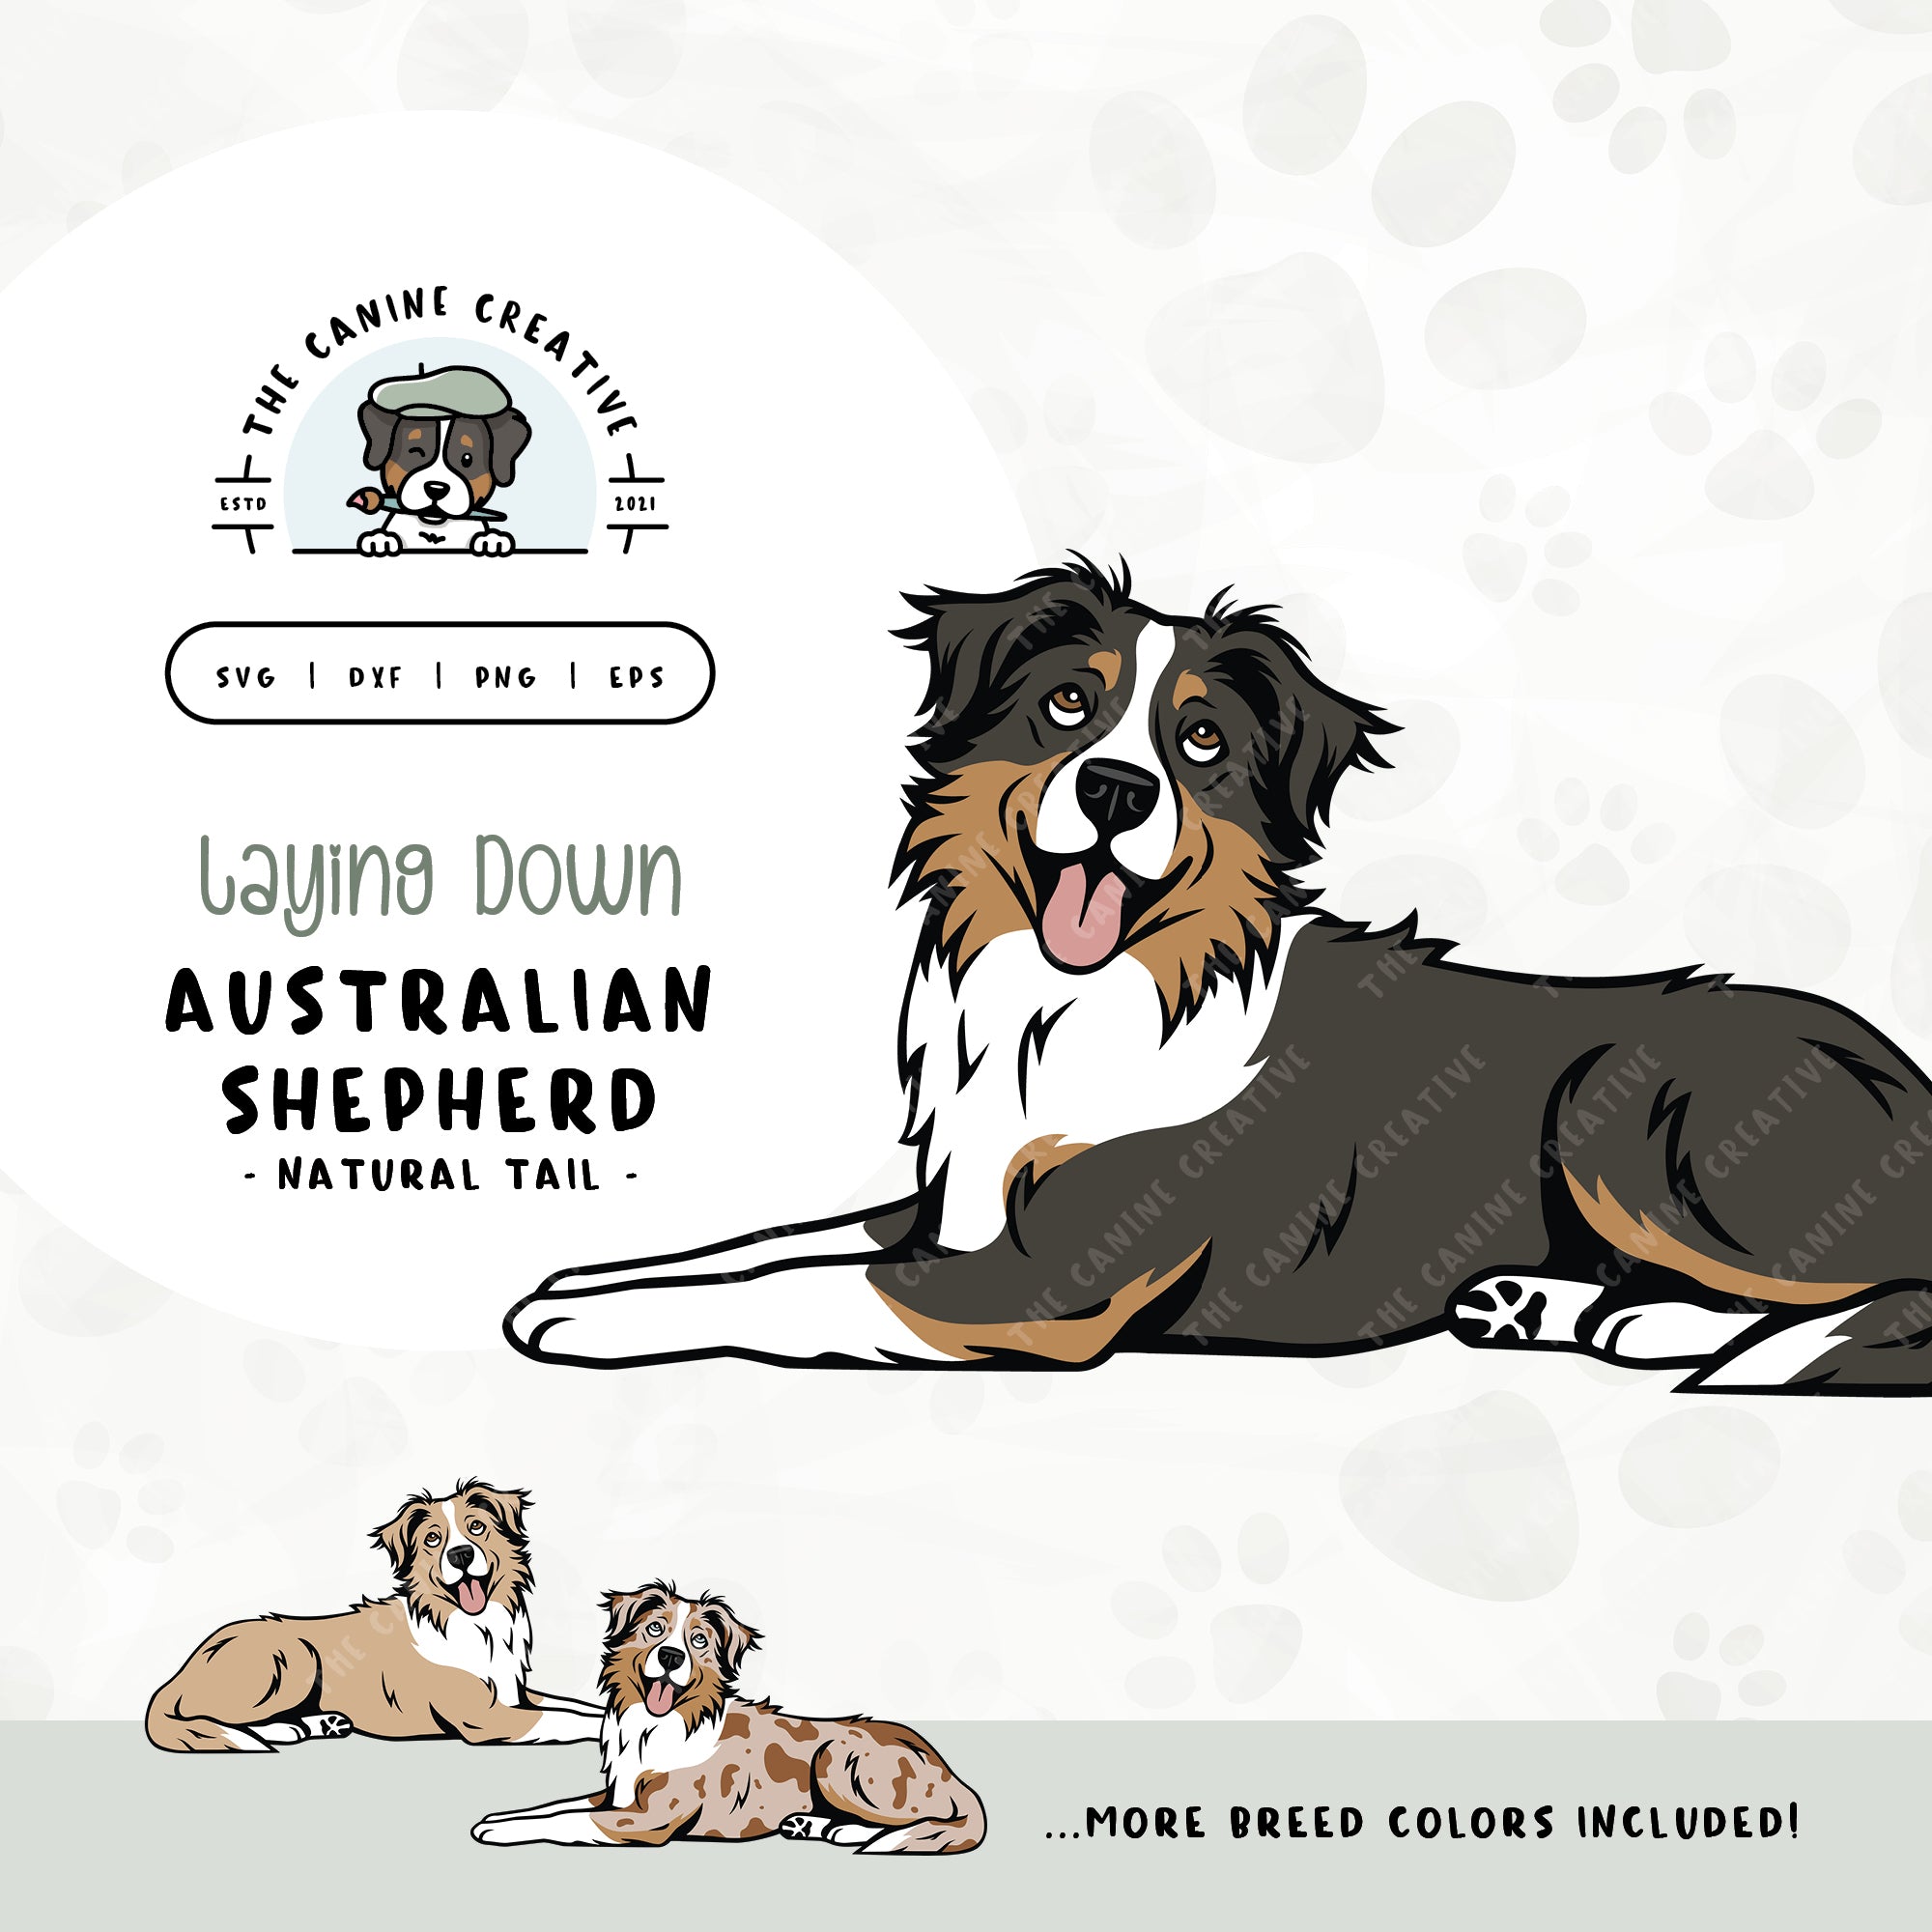 This laying down dog design features an Australian Shepherd with a long tail. File formats include: SVG, DXF, PNG, and EPS.